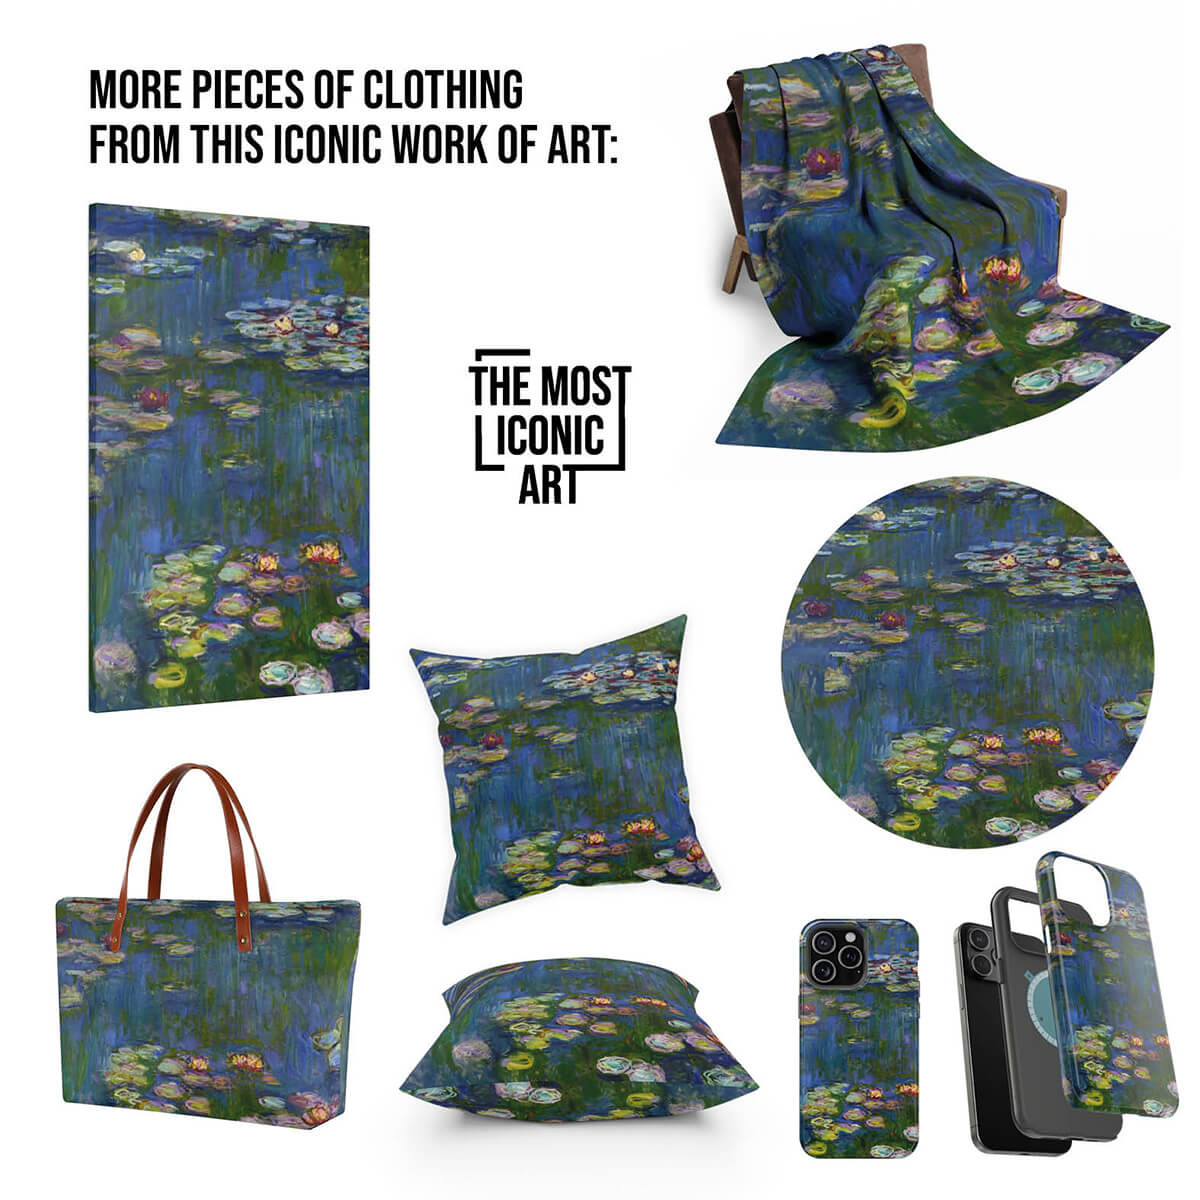 Luxurious satin fabric adorned with Claude Monet's iconic Water Lilies painting